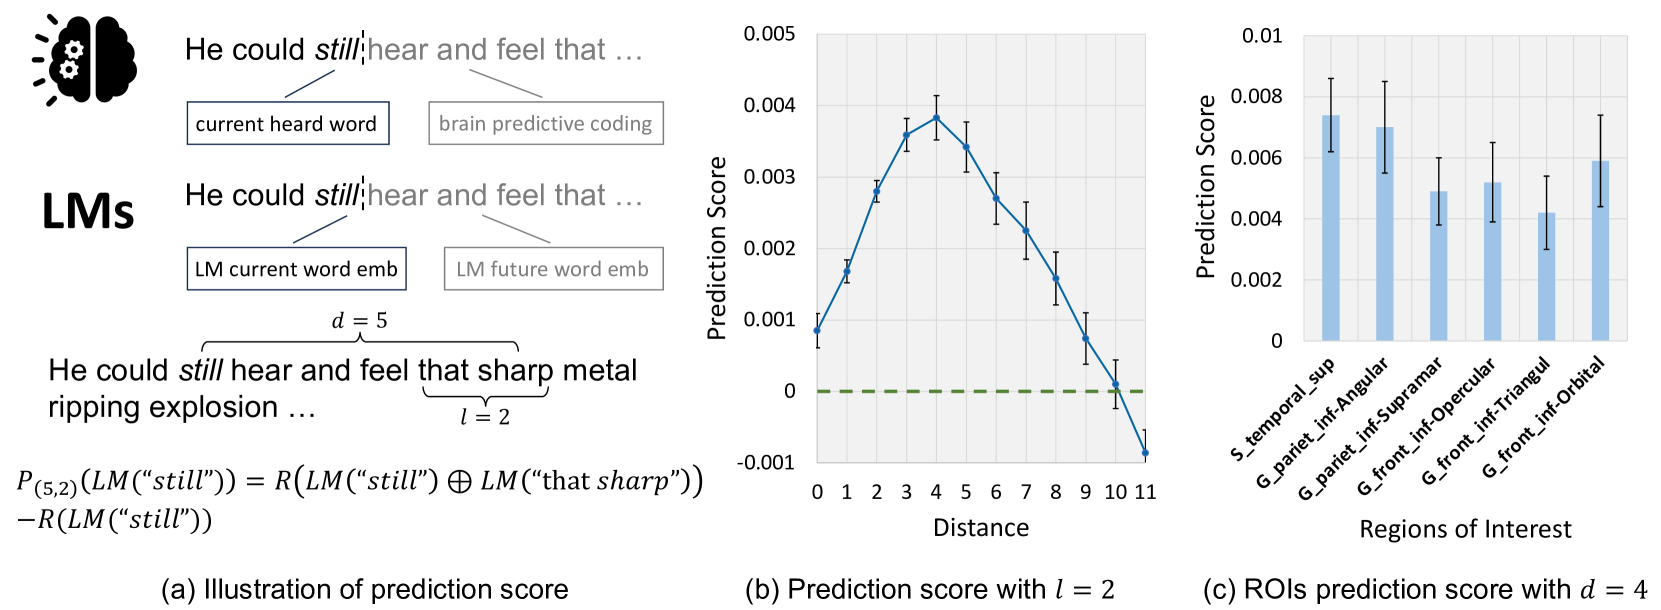 Language Reconstruction with Brain Predictive Coding from fMRI Data